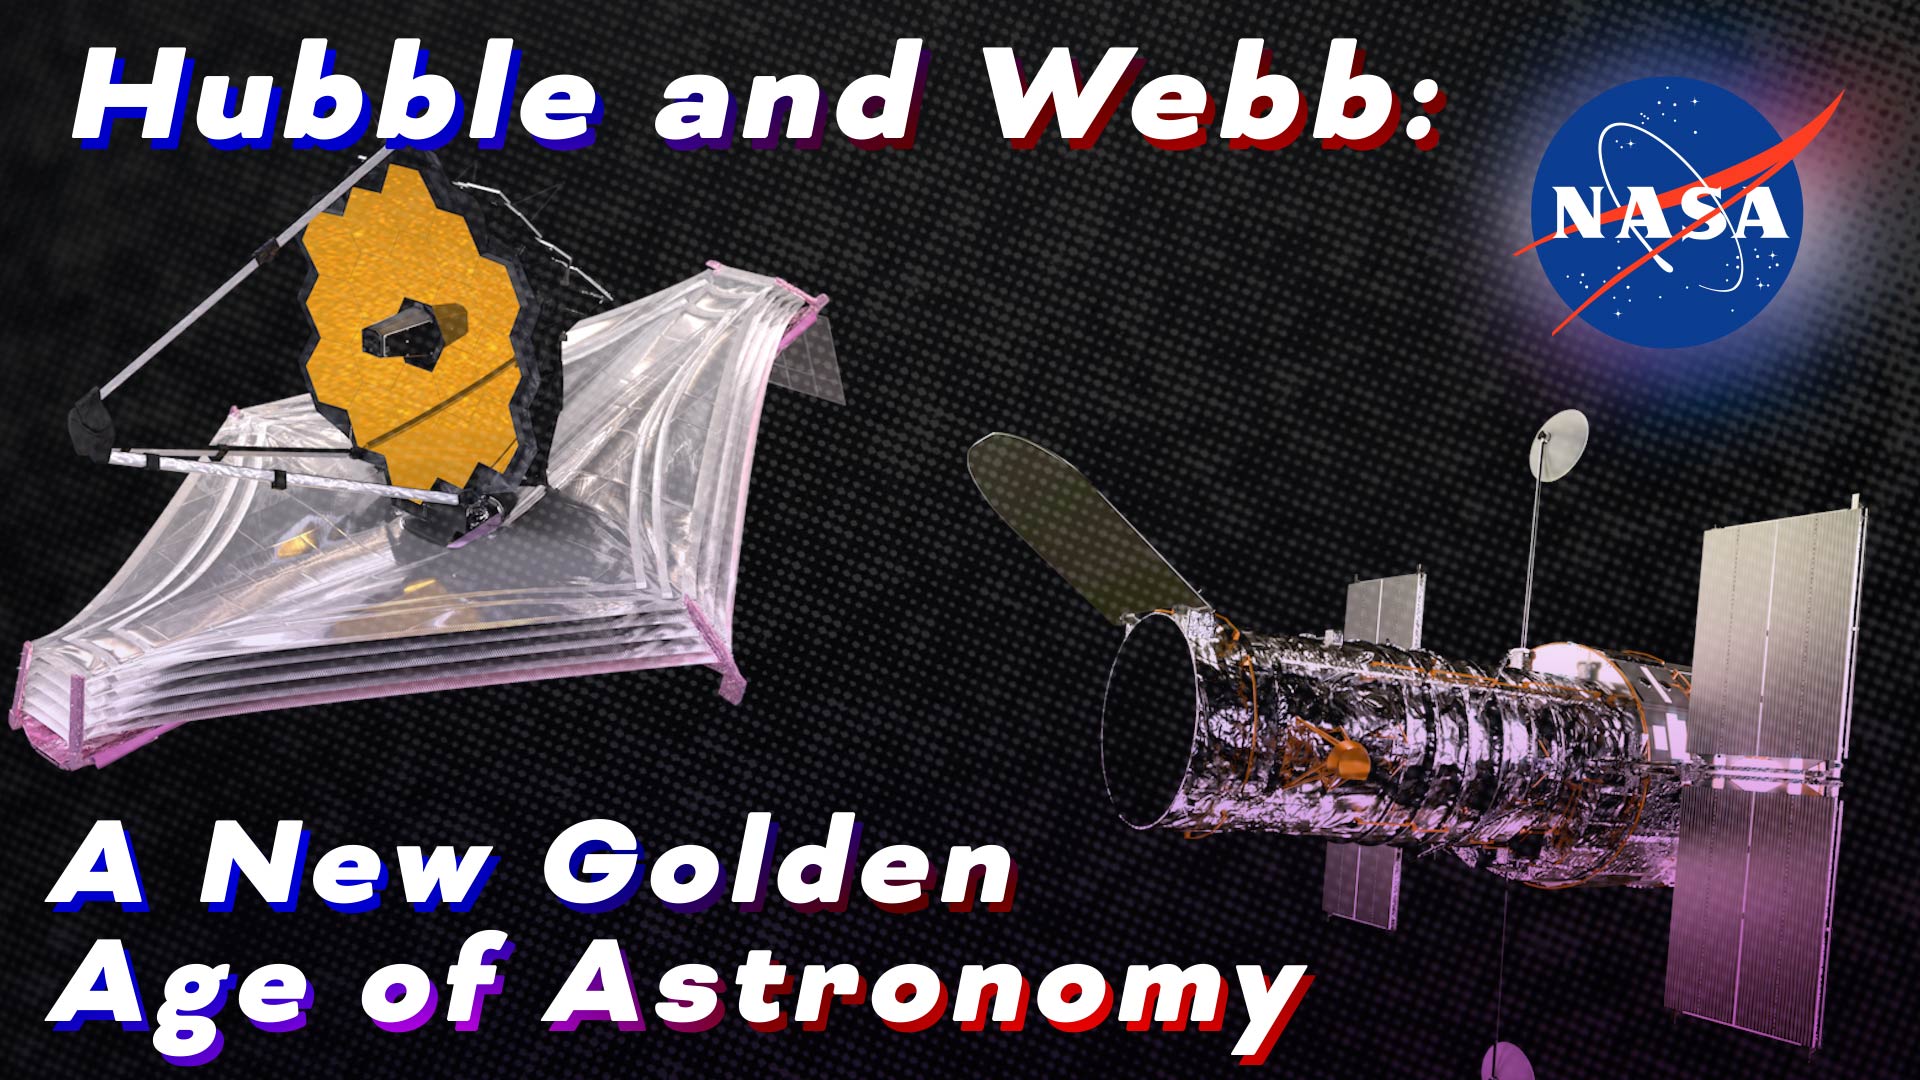 Preview Image for Hubble and Webb: A New Golden Age of Astronomy